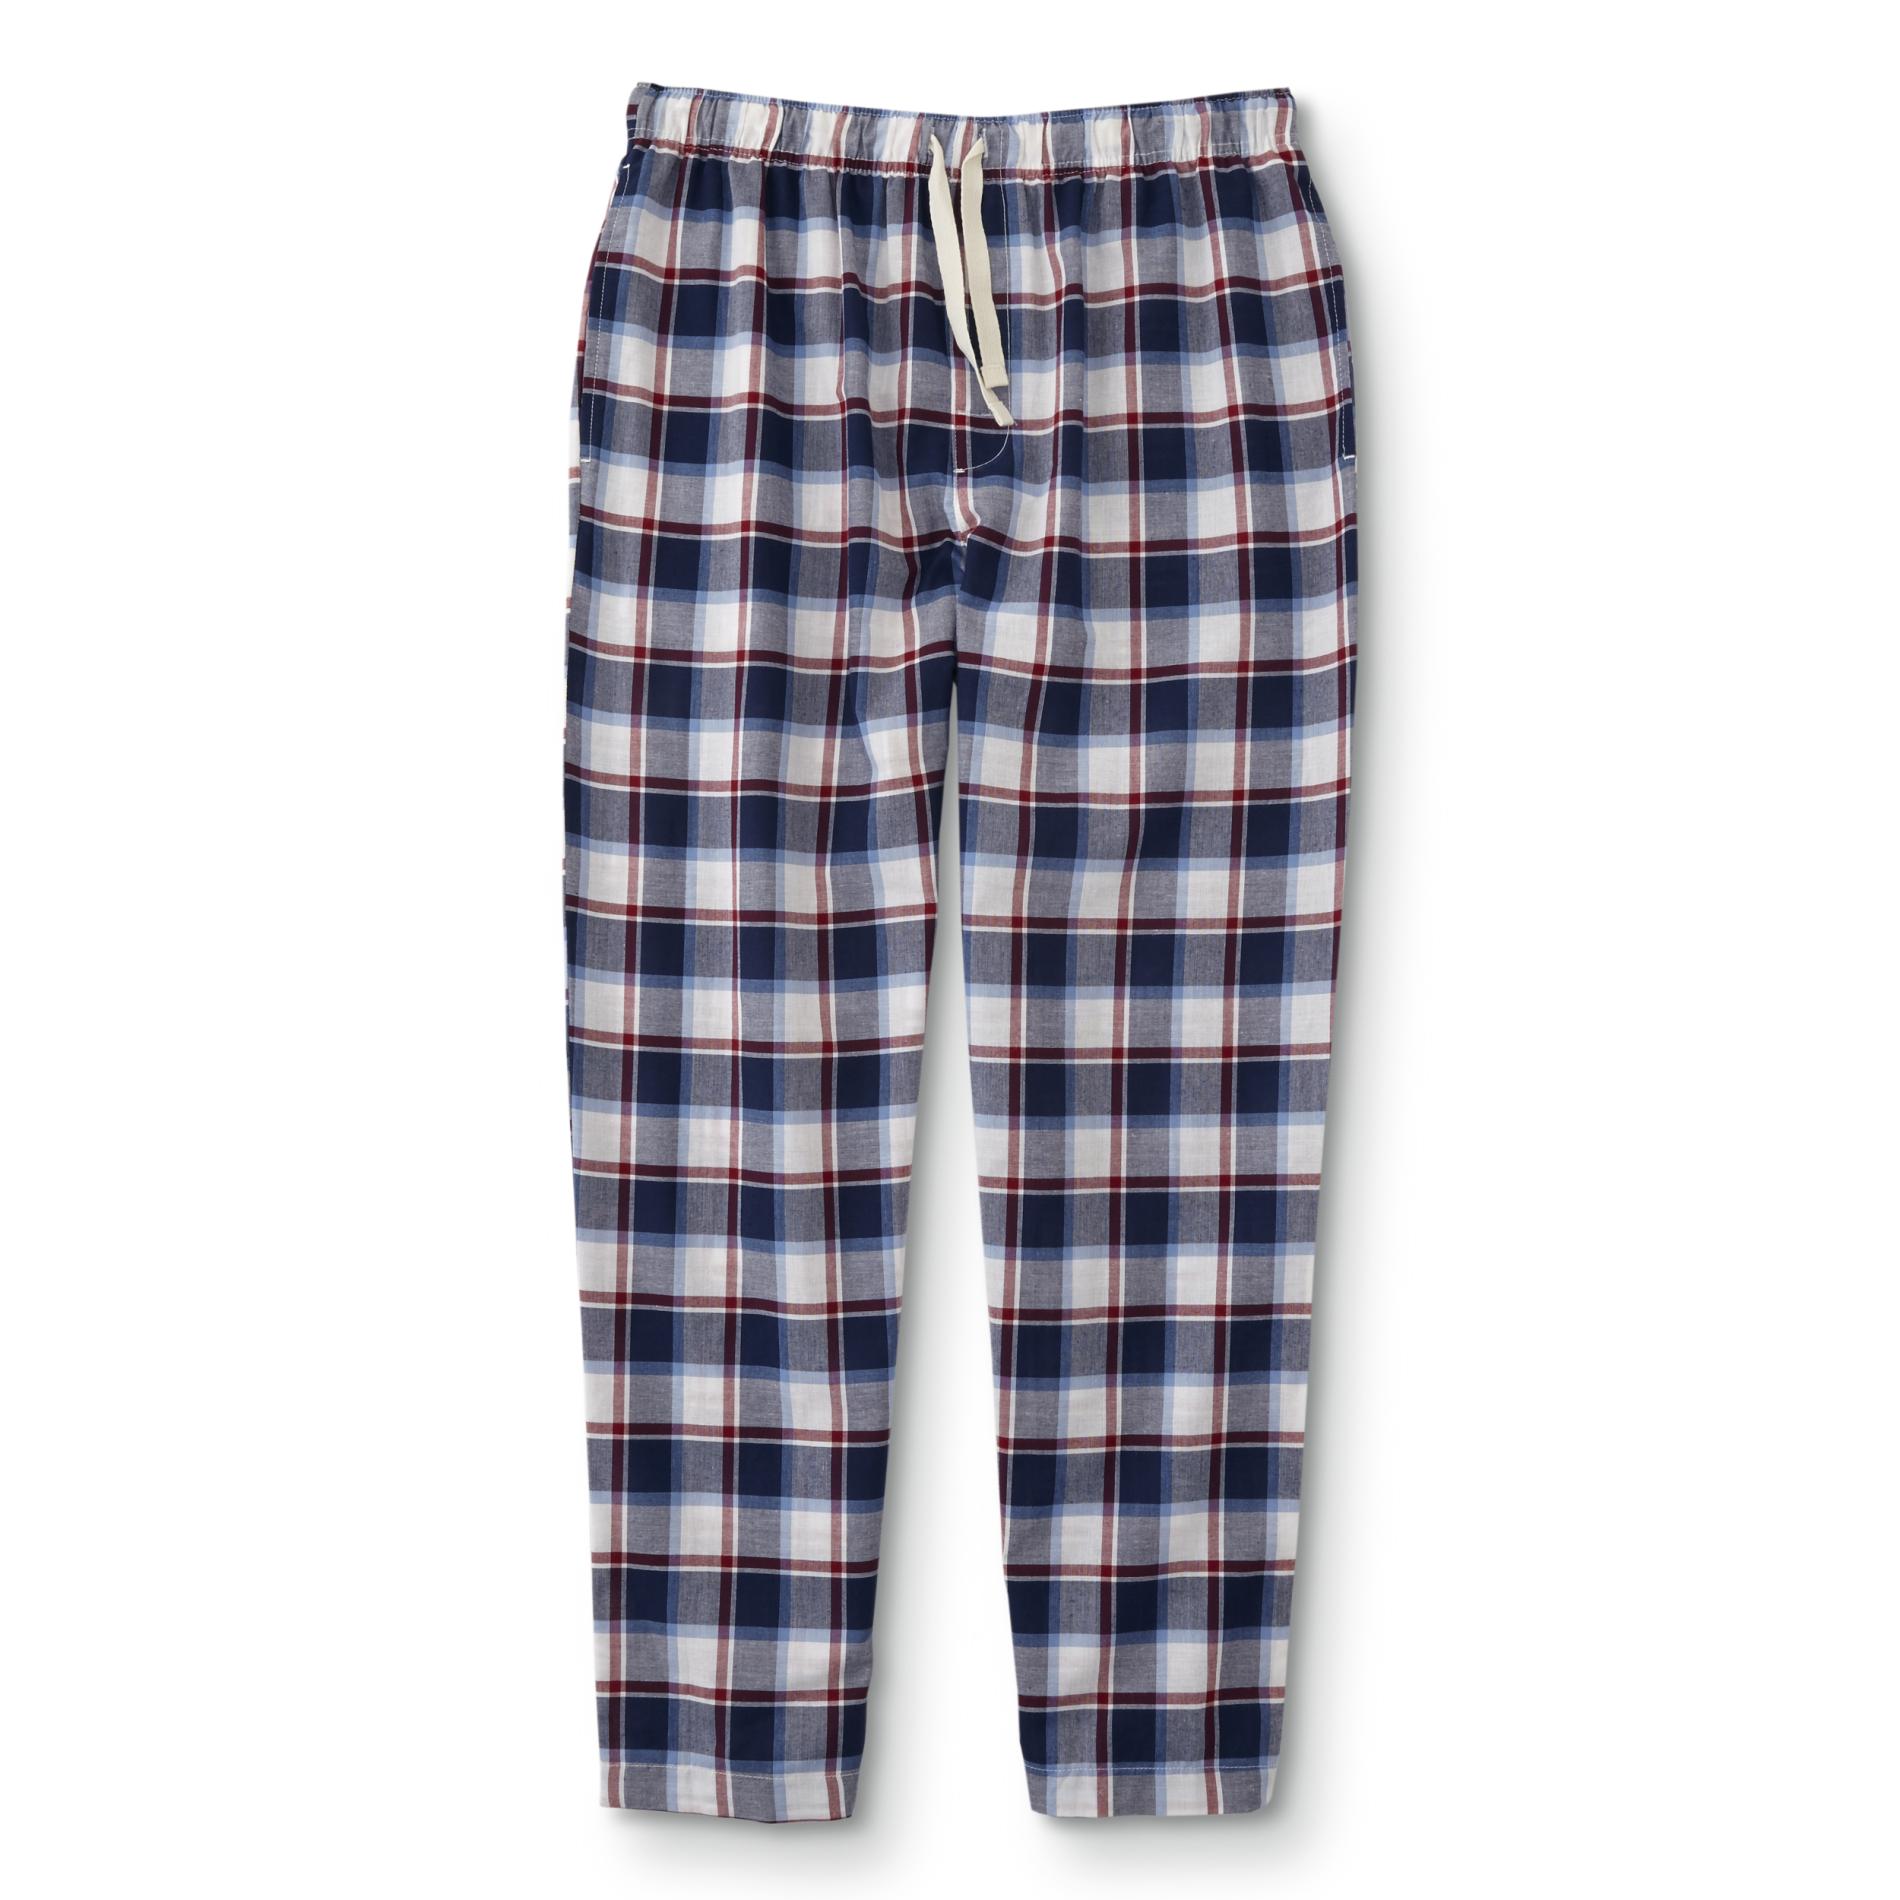 Simply Styled Men's Pajama Pants - Plaid | Shop Your Way: Online ...